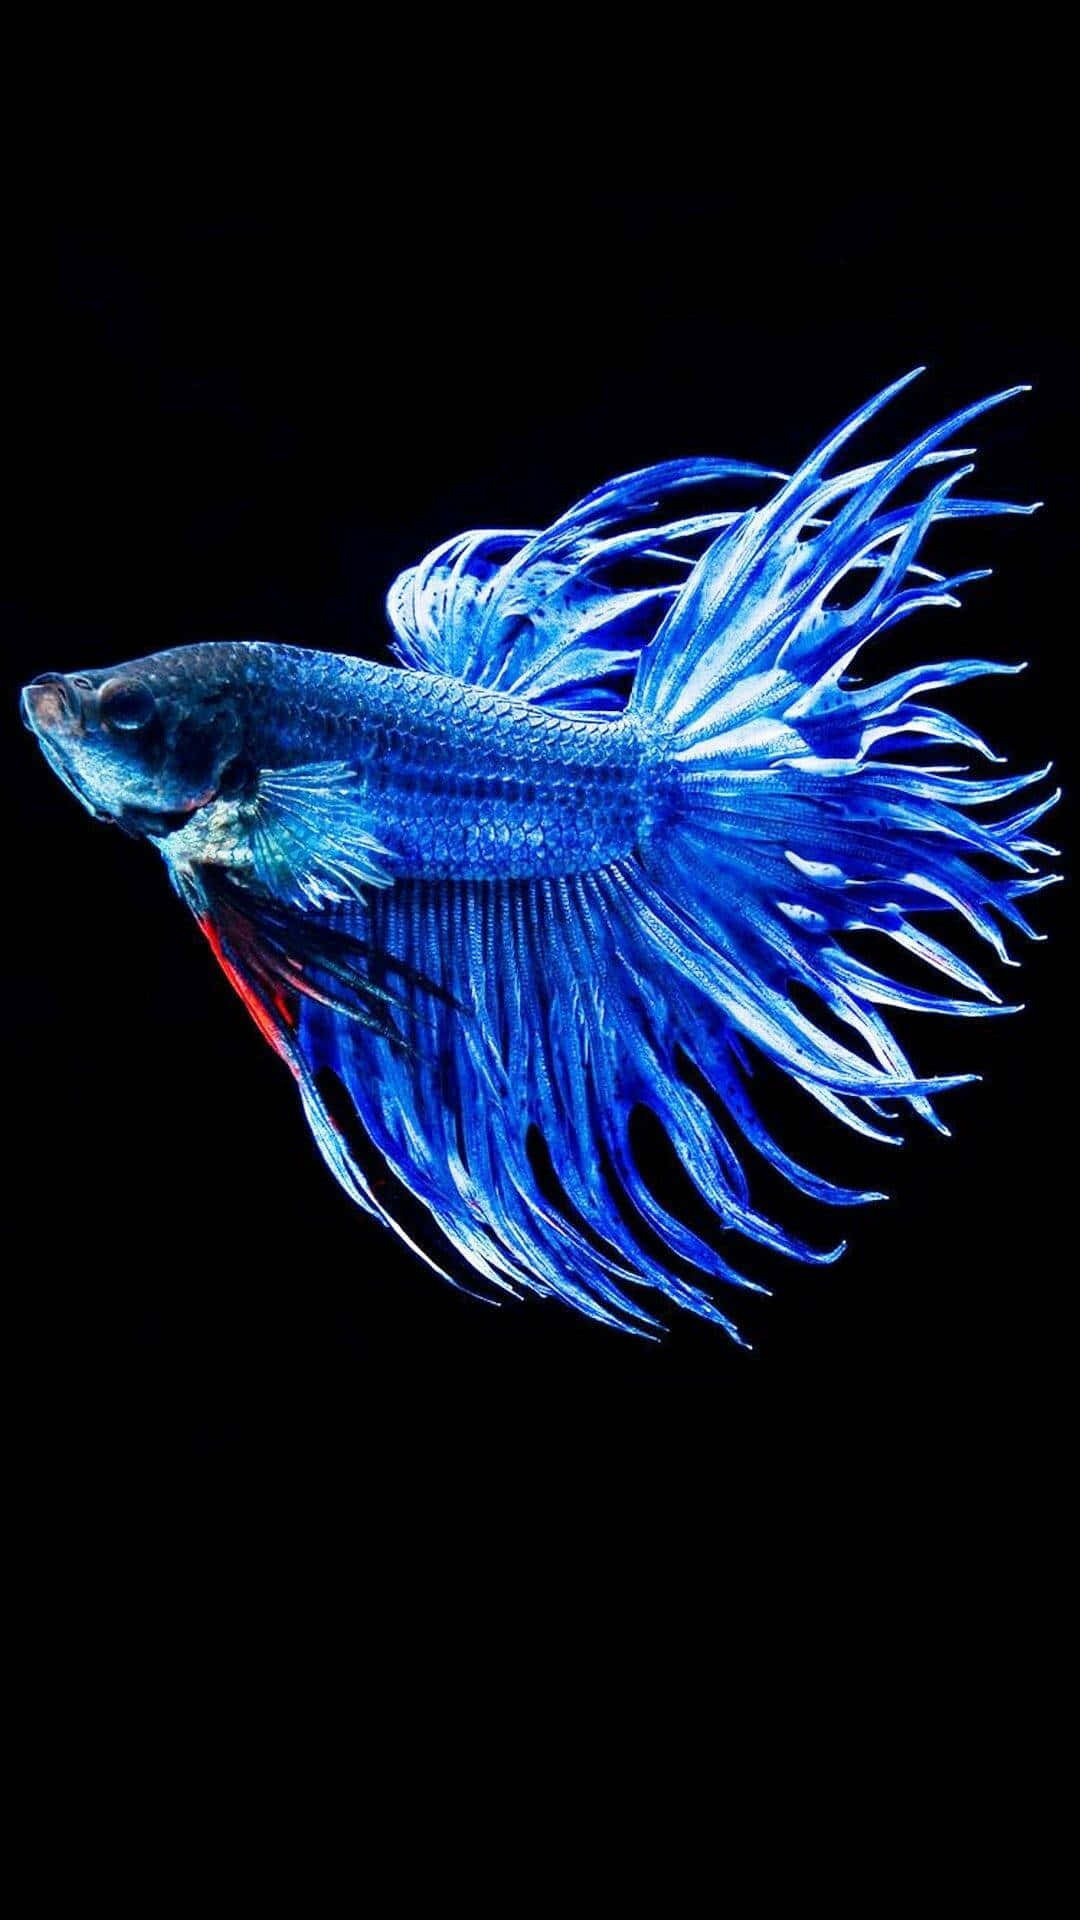 Blue Crowned Betta Fish Background